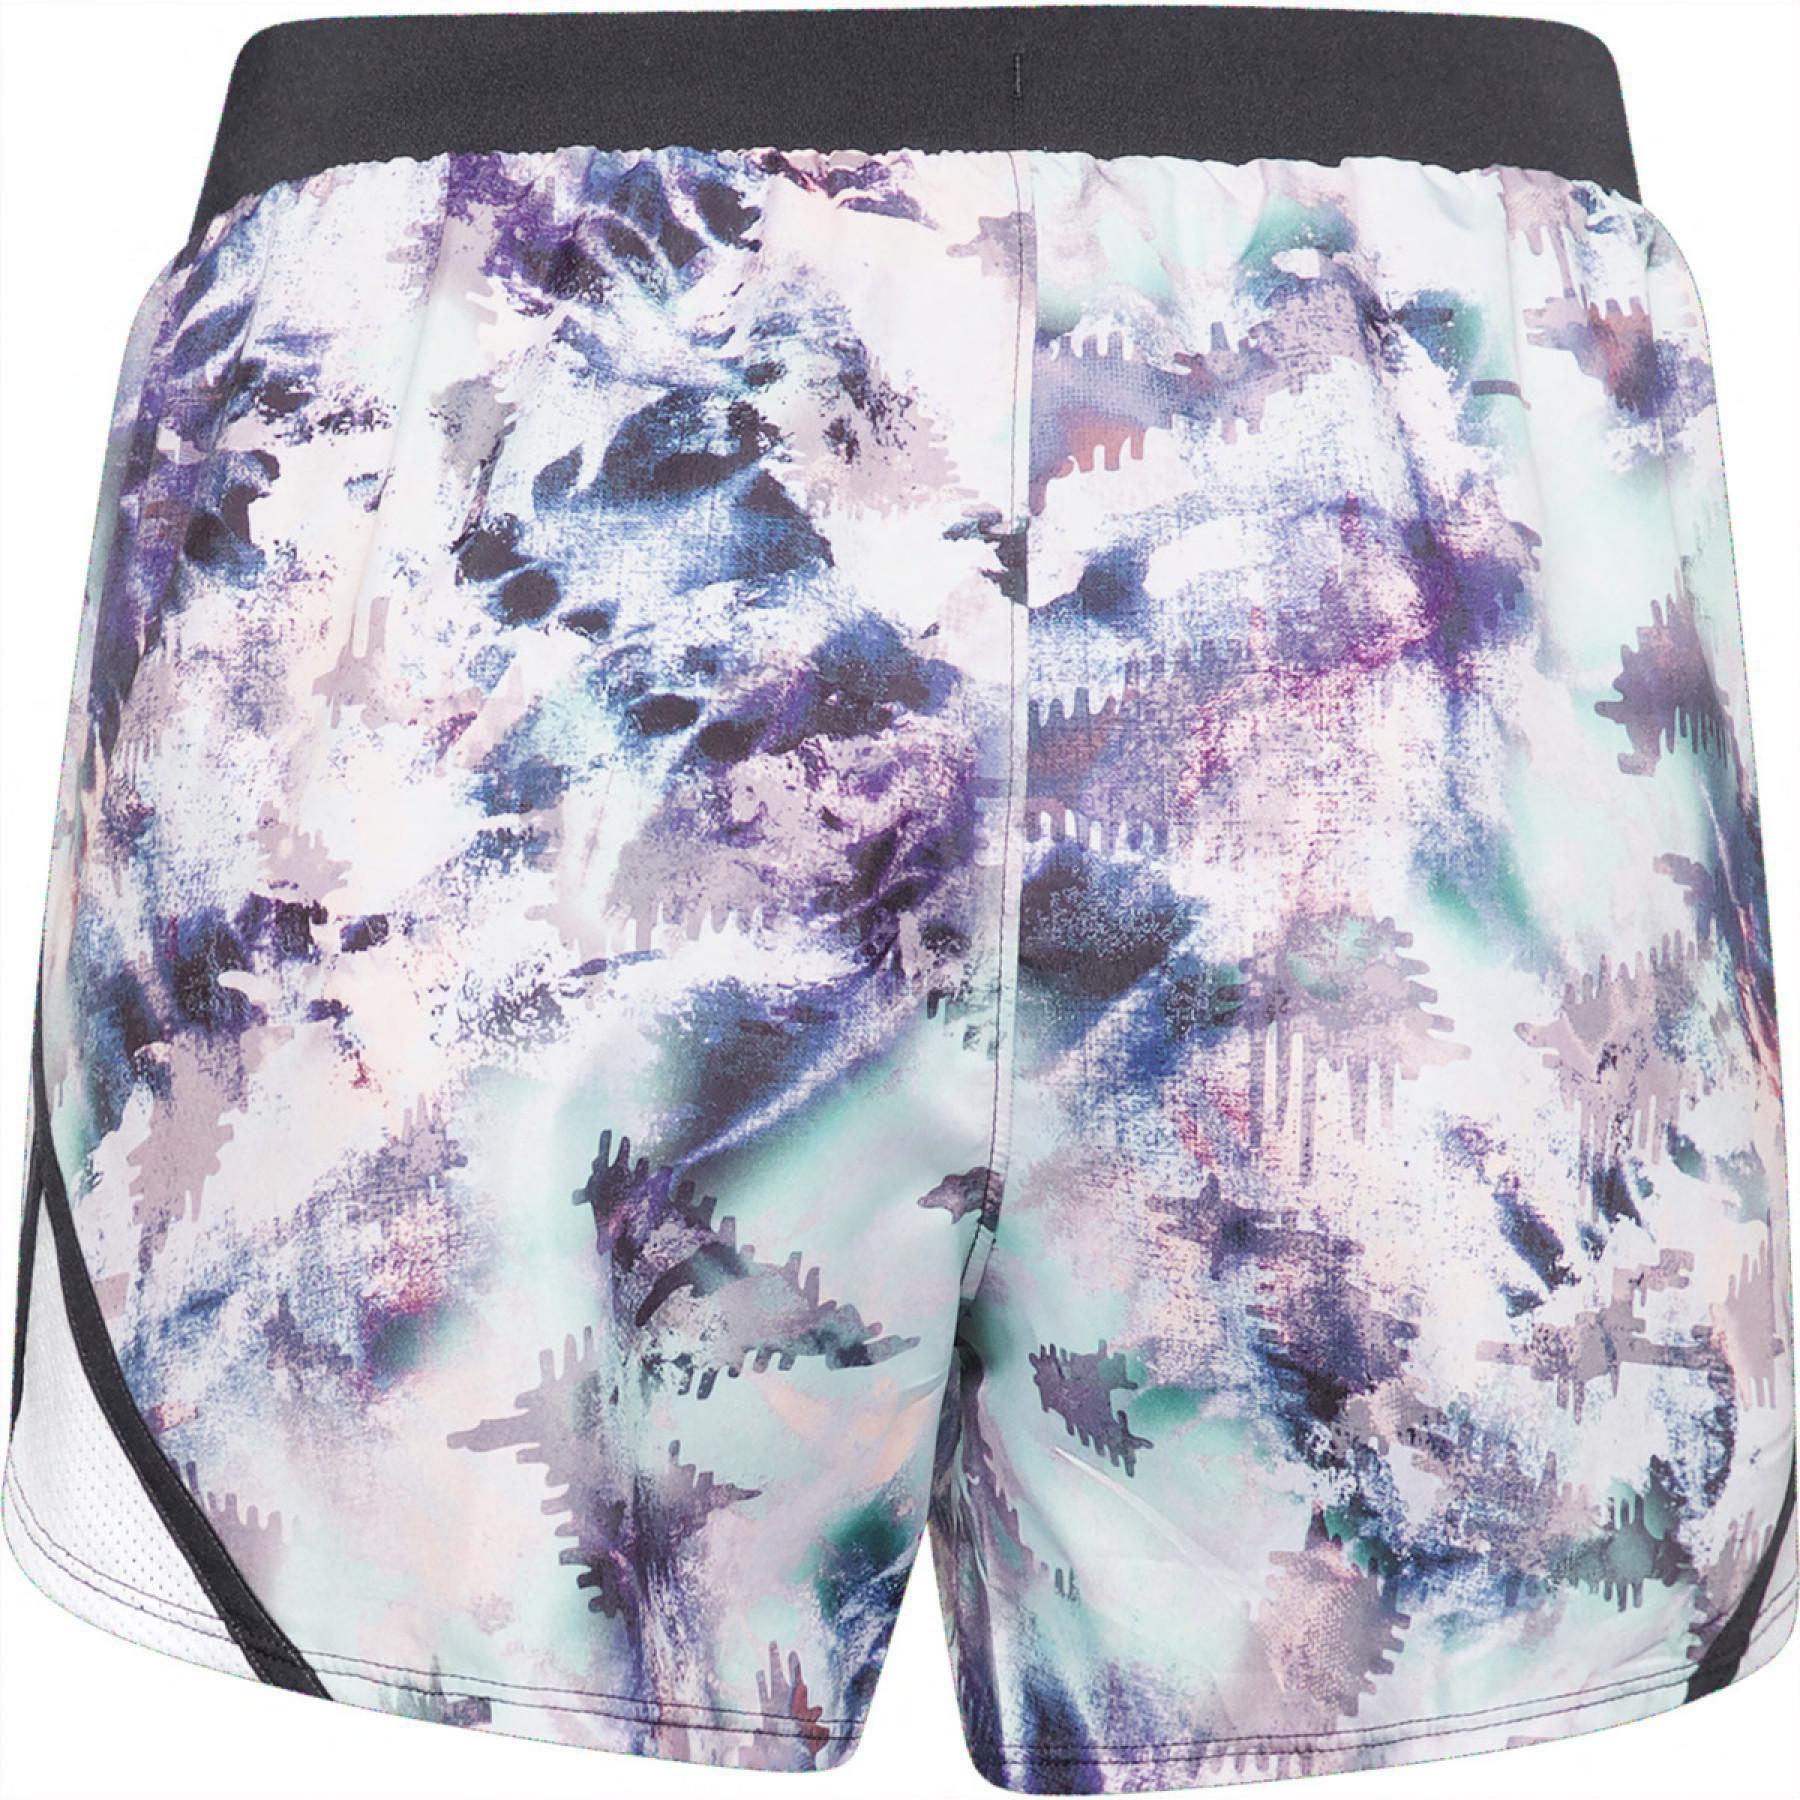 Women's shorts Under Armour Fly-By 2.0 imprimé